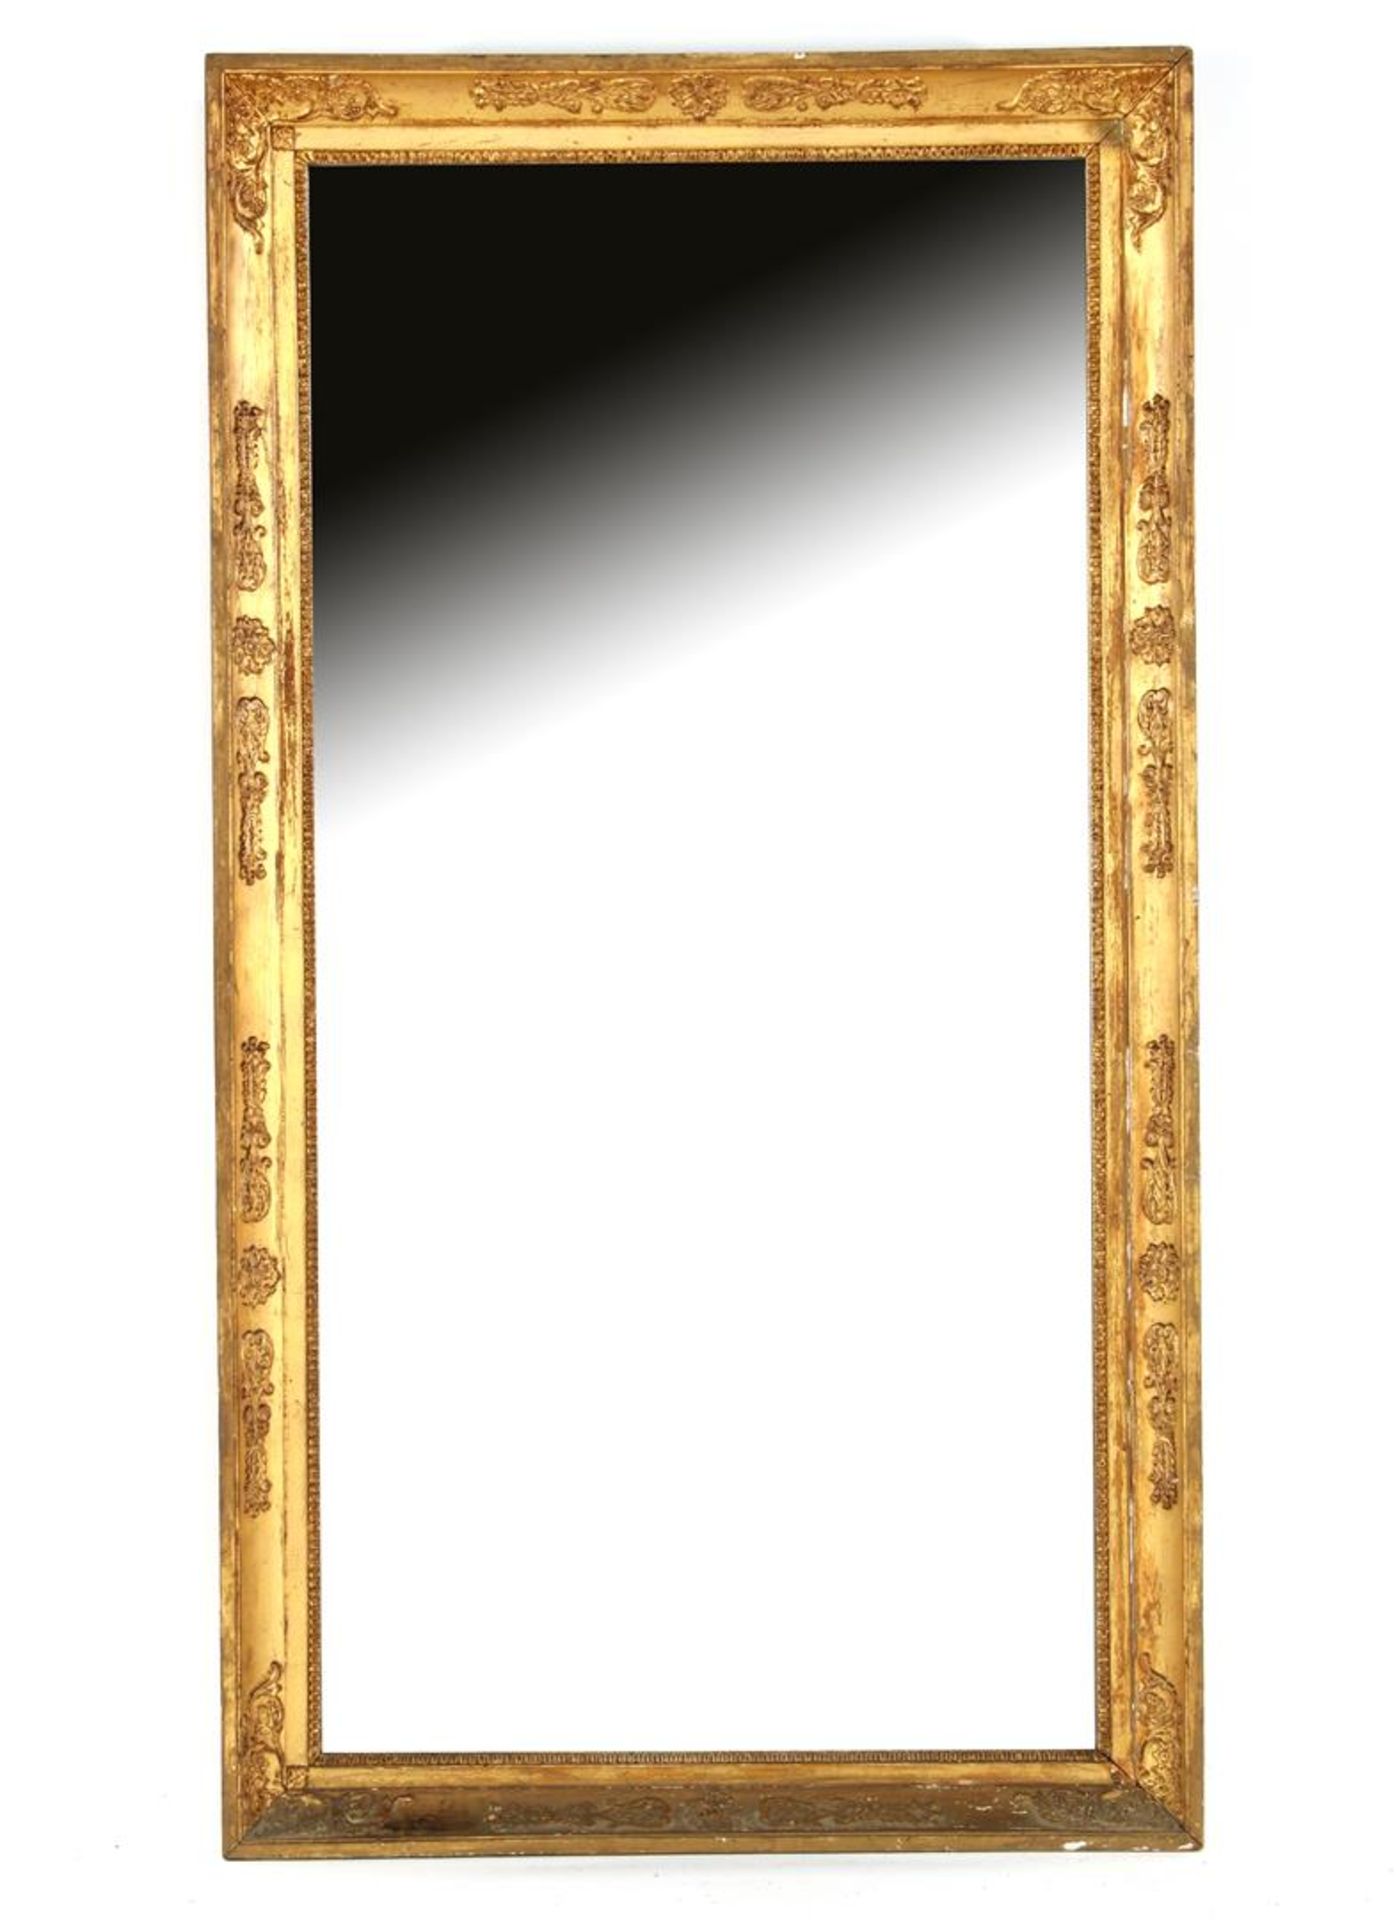 Early 19th century mirror